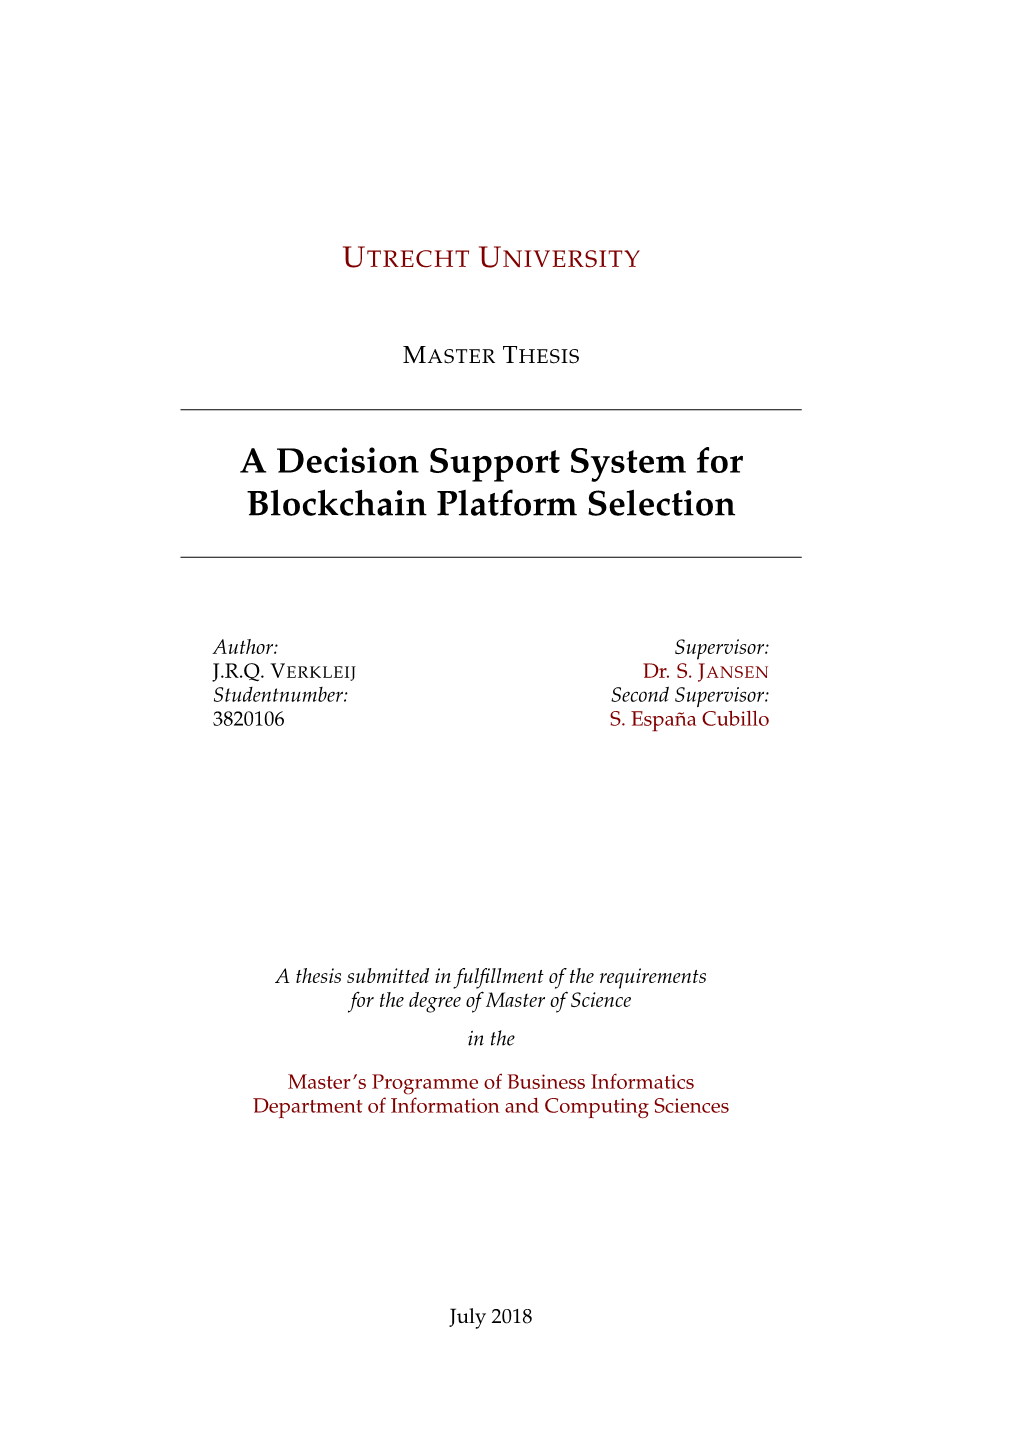 A Decision Support System for Blockchain Platform Selection